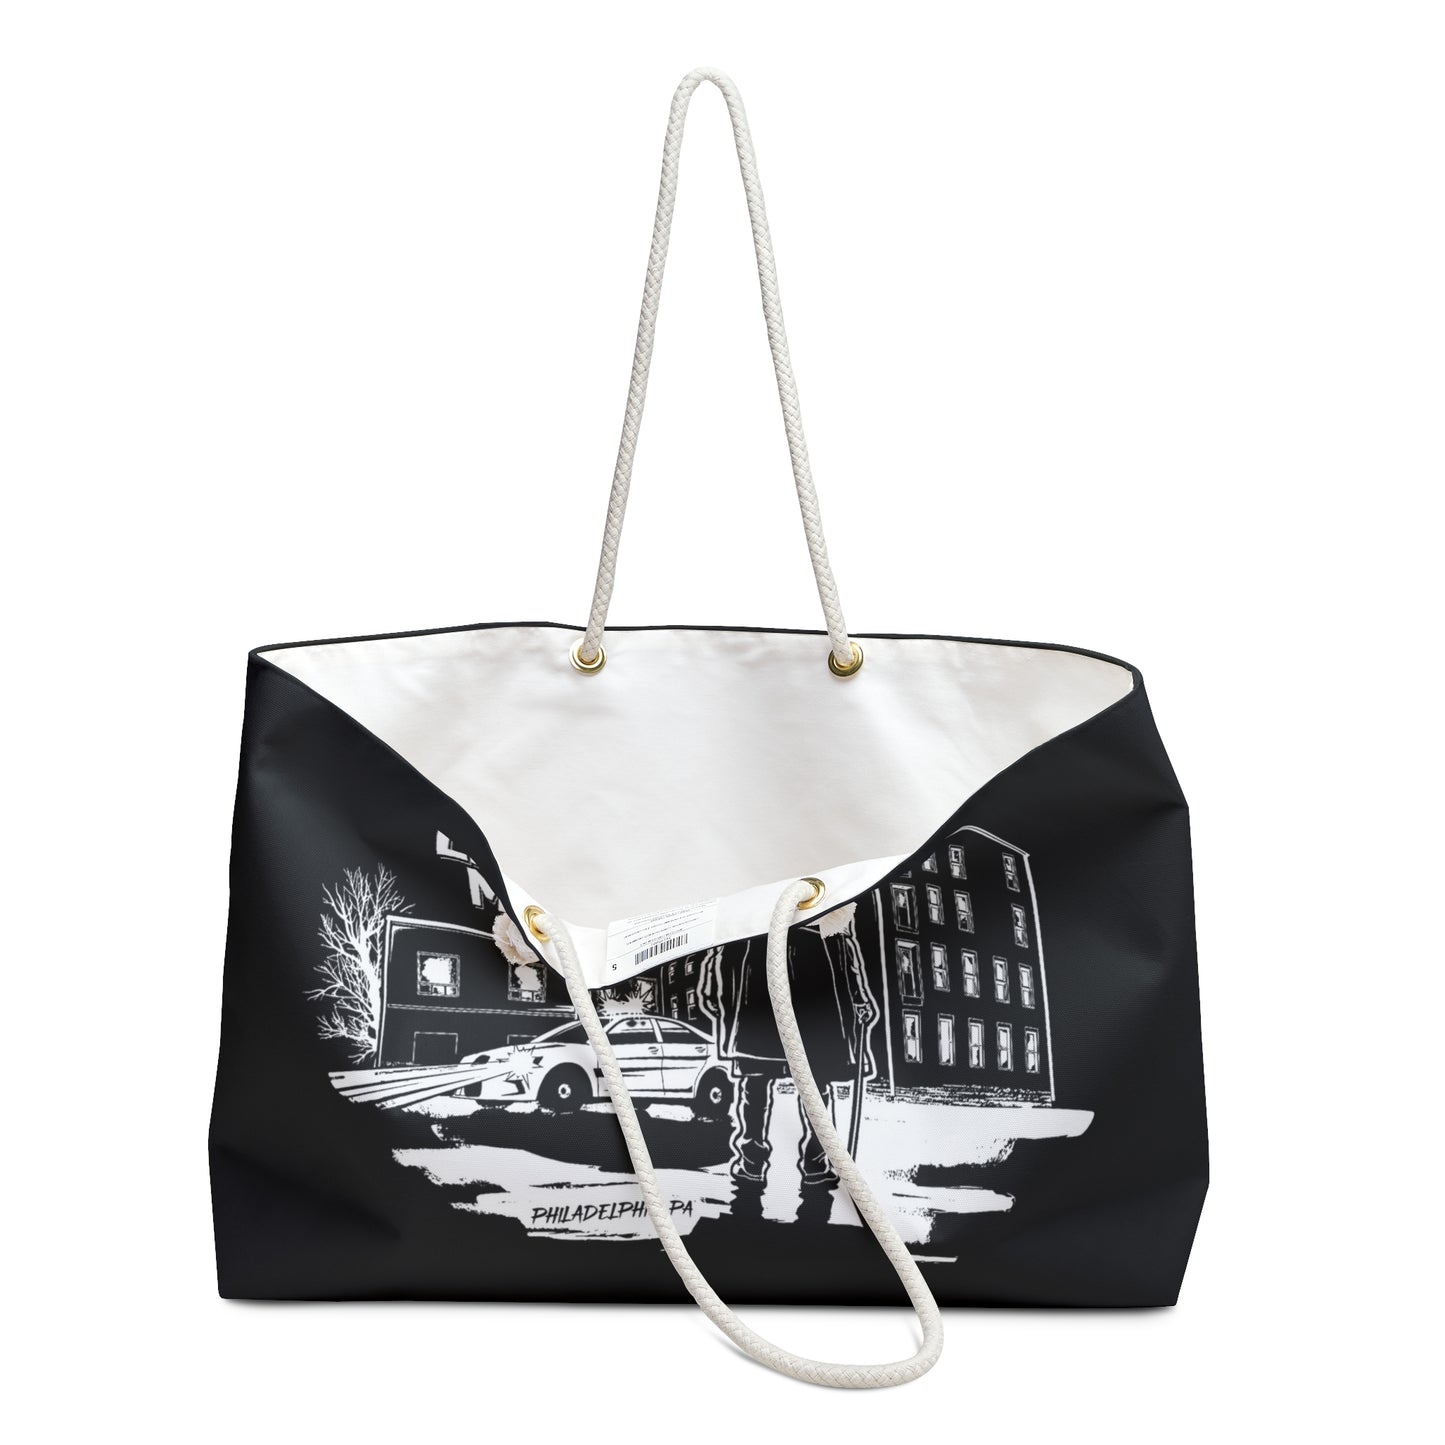 Lincoln Mill Haunted House - Viktor and the Mill Weekender Tote Bag